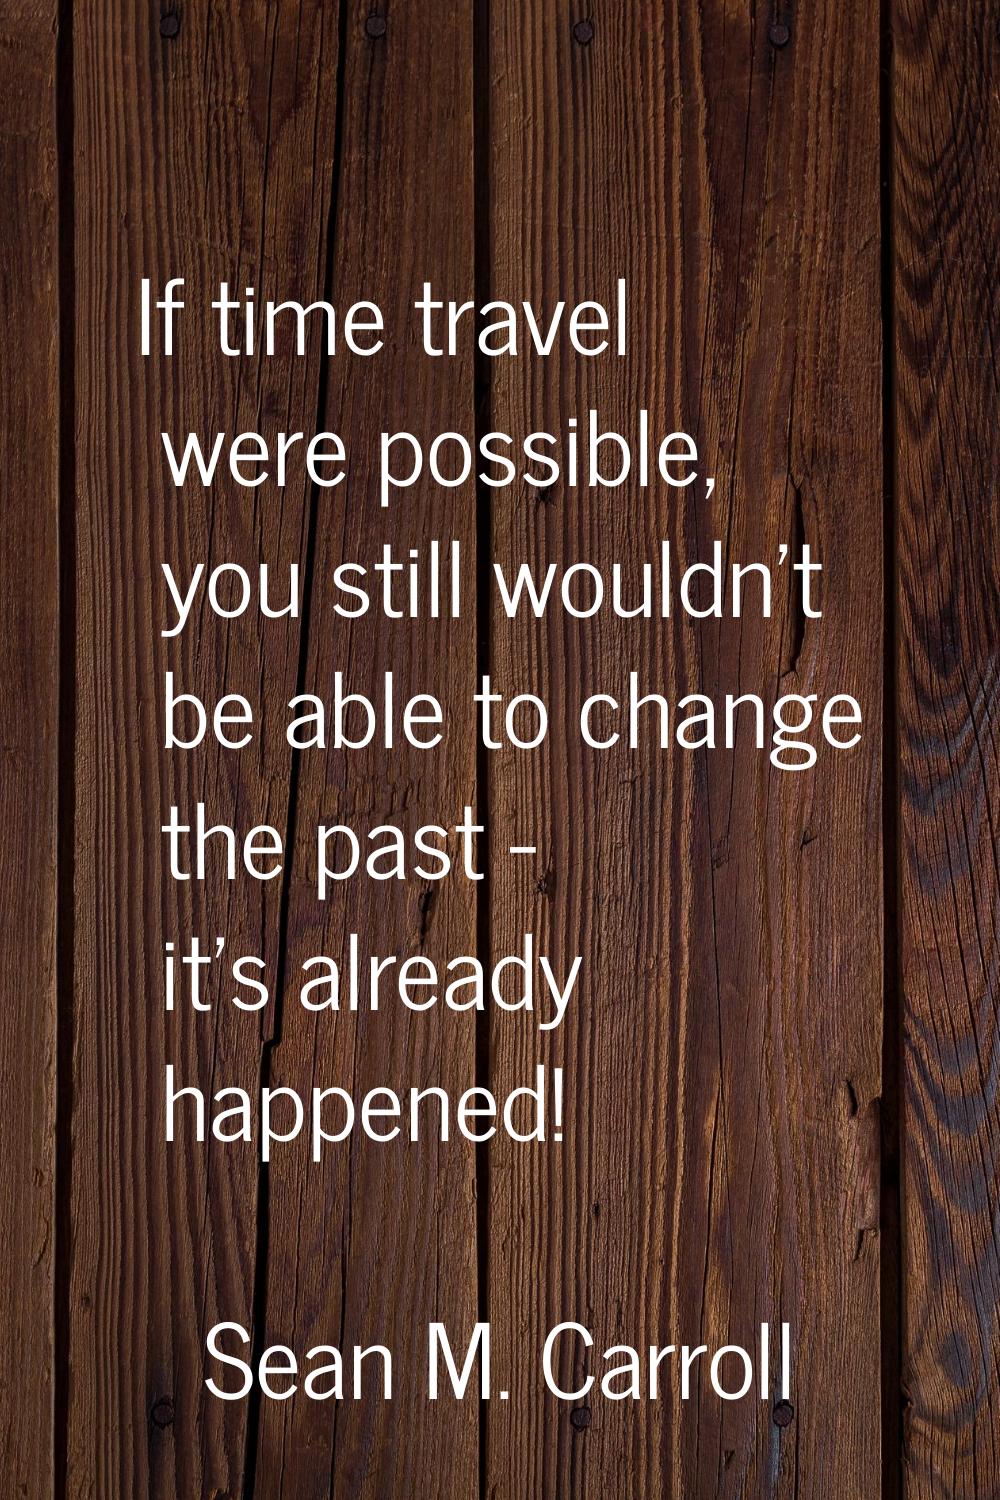 If time travel were possible, you still wouldn't be able to change the past - it's already happened